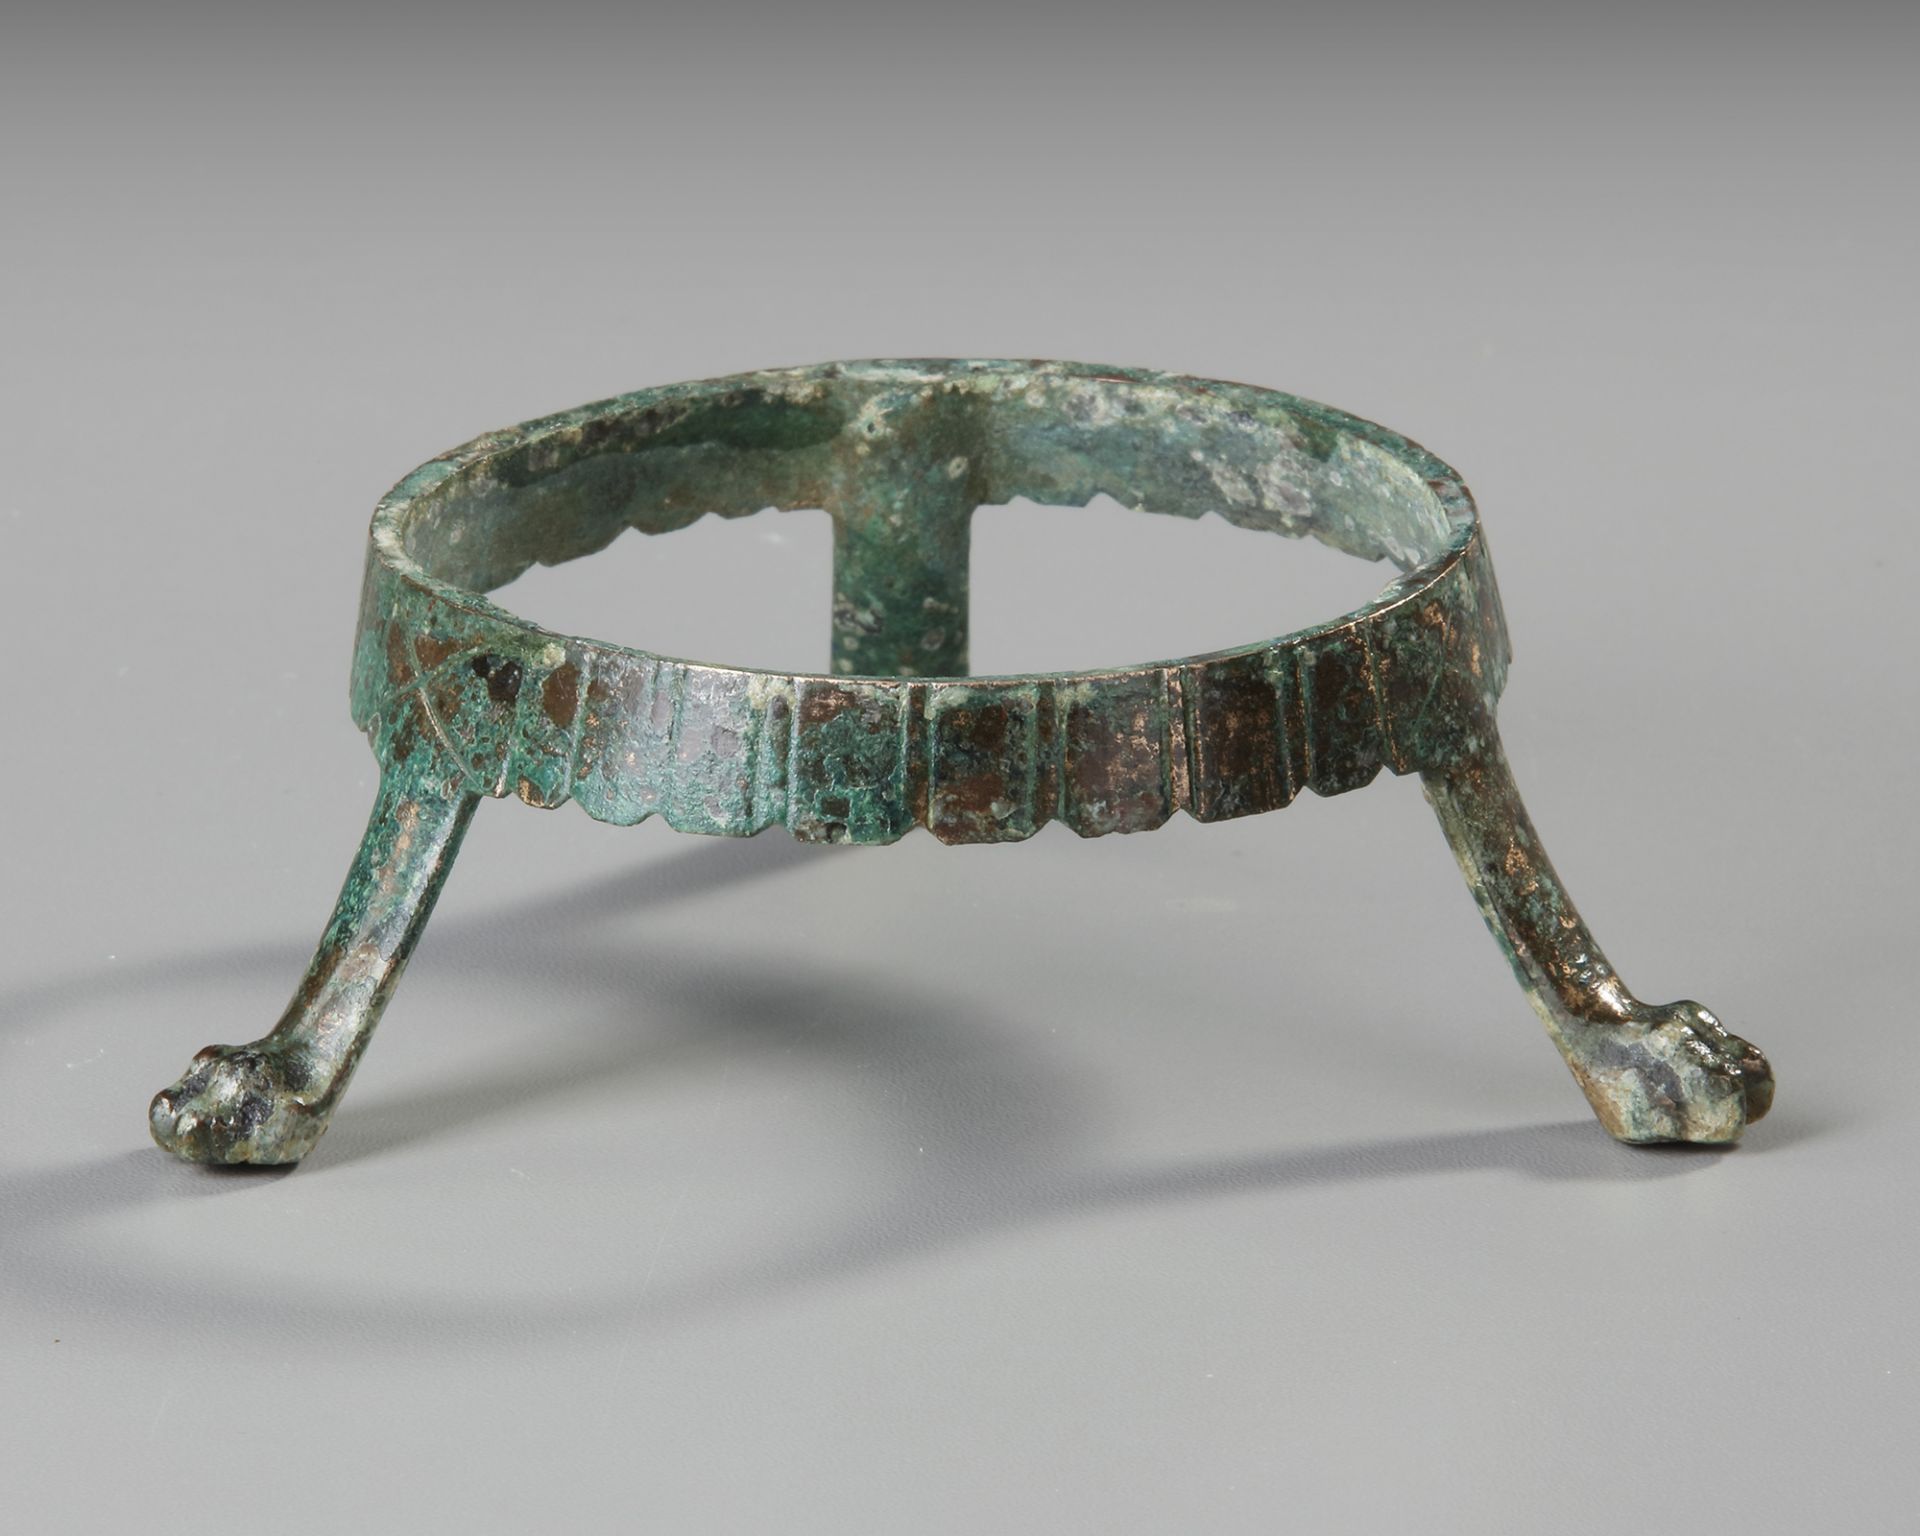 A BRONZE ROMAN STAND FOR CUPS, 2ND-3RD CENTURY AD